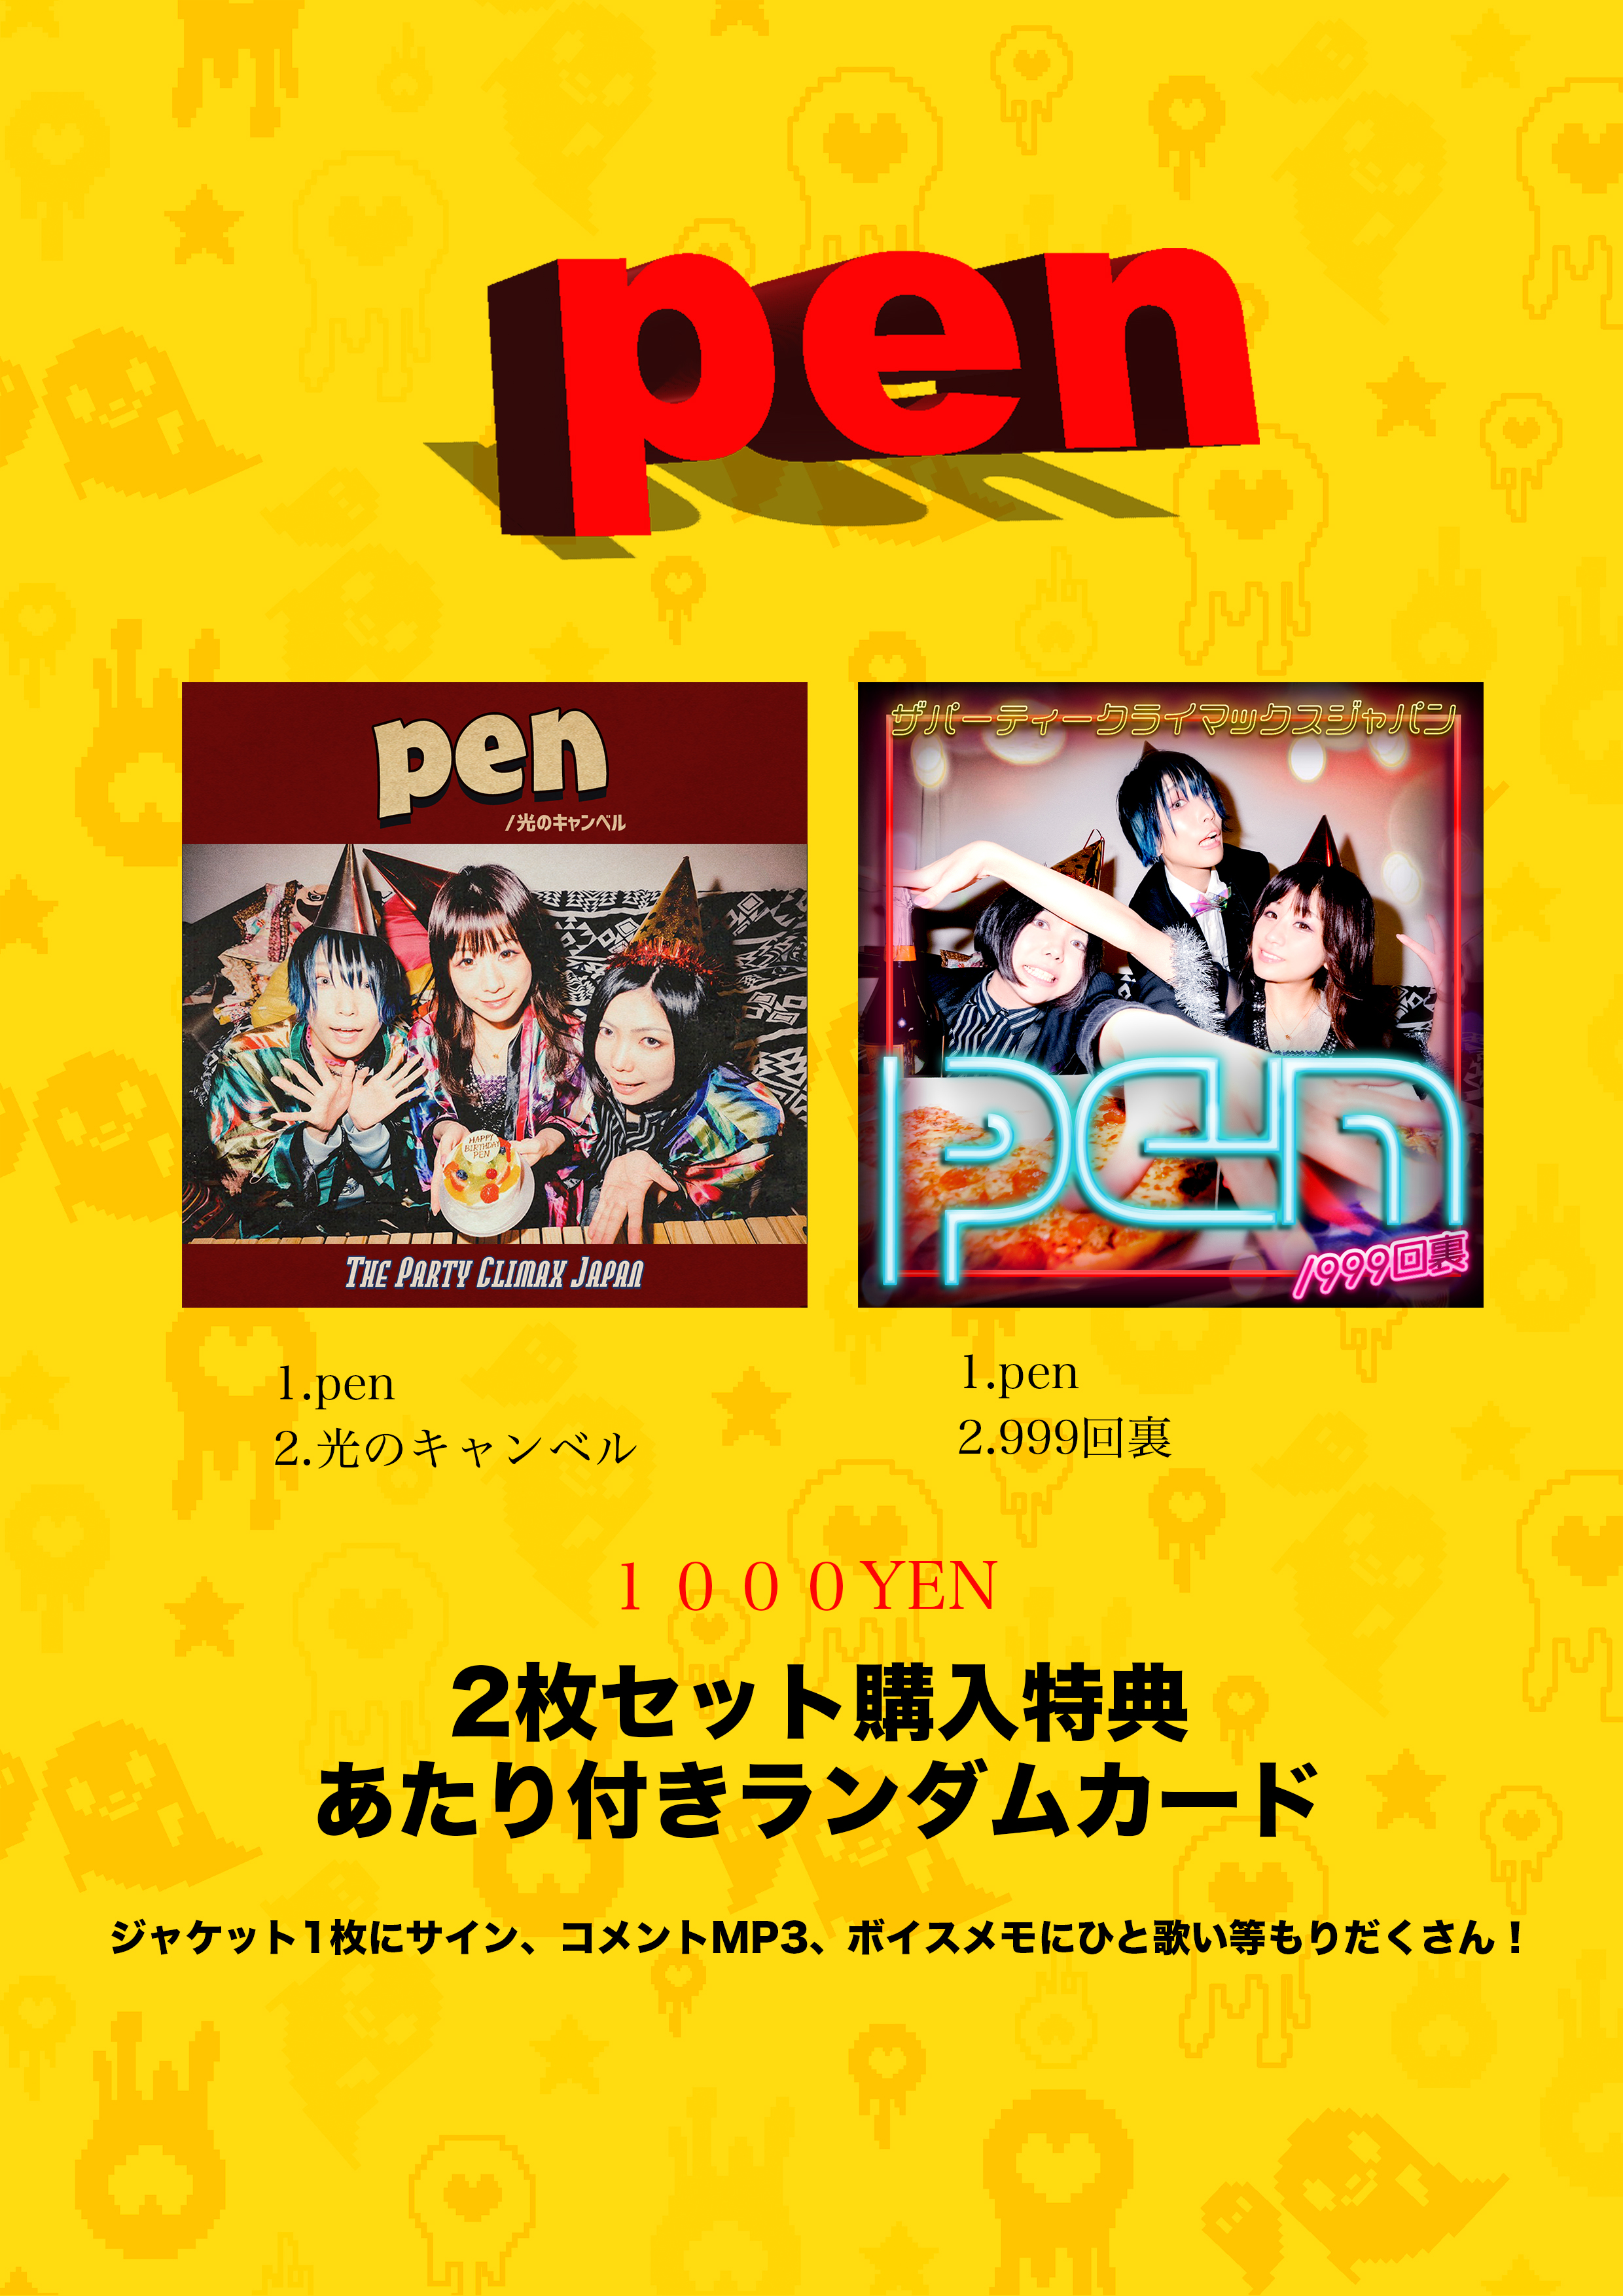 THE PARTY CLIMAX JAPAN「pen」リリースイベント